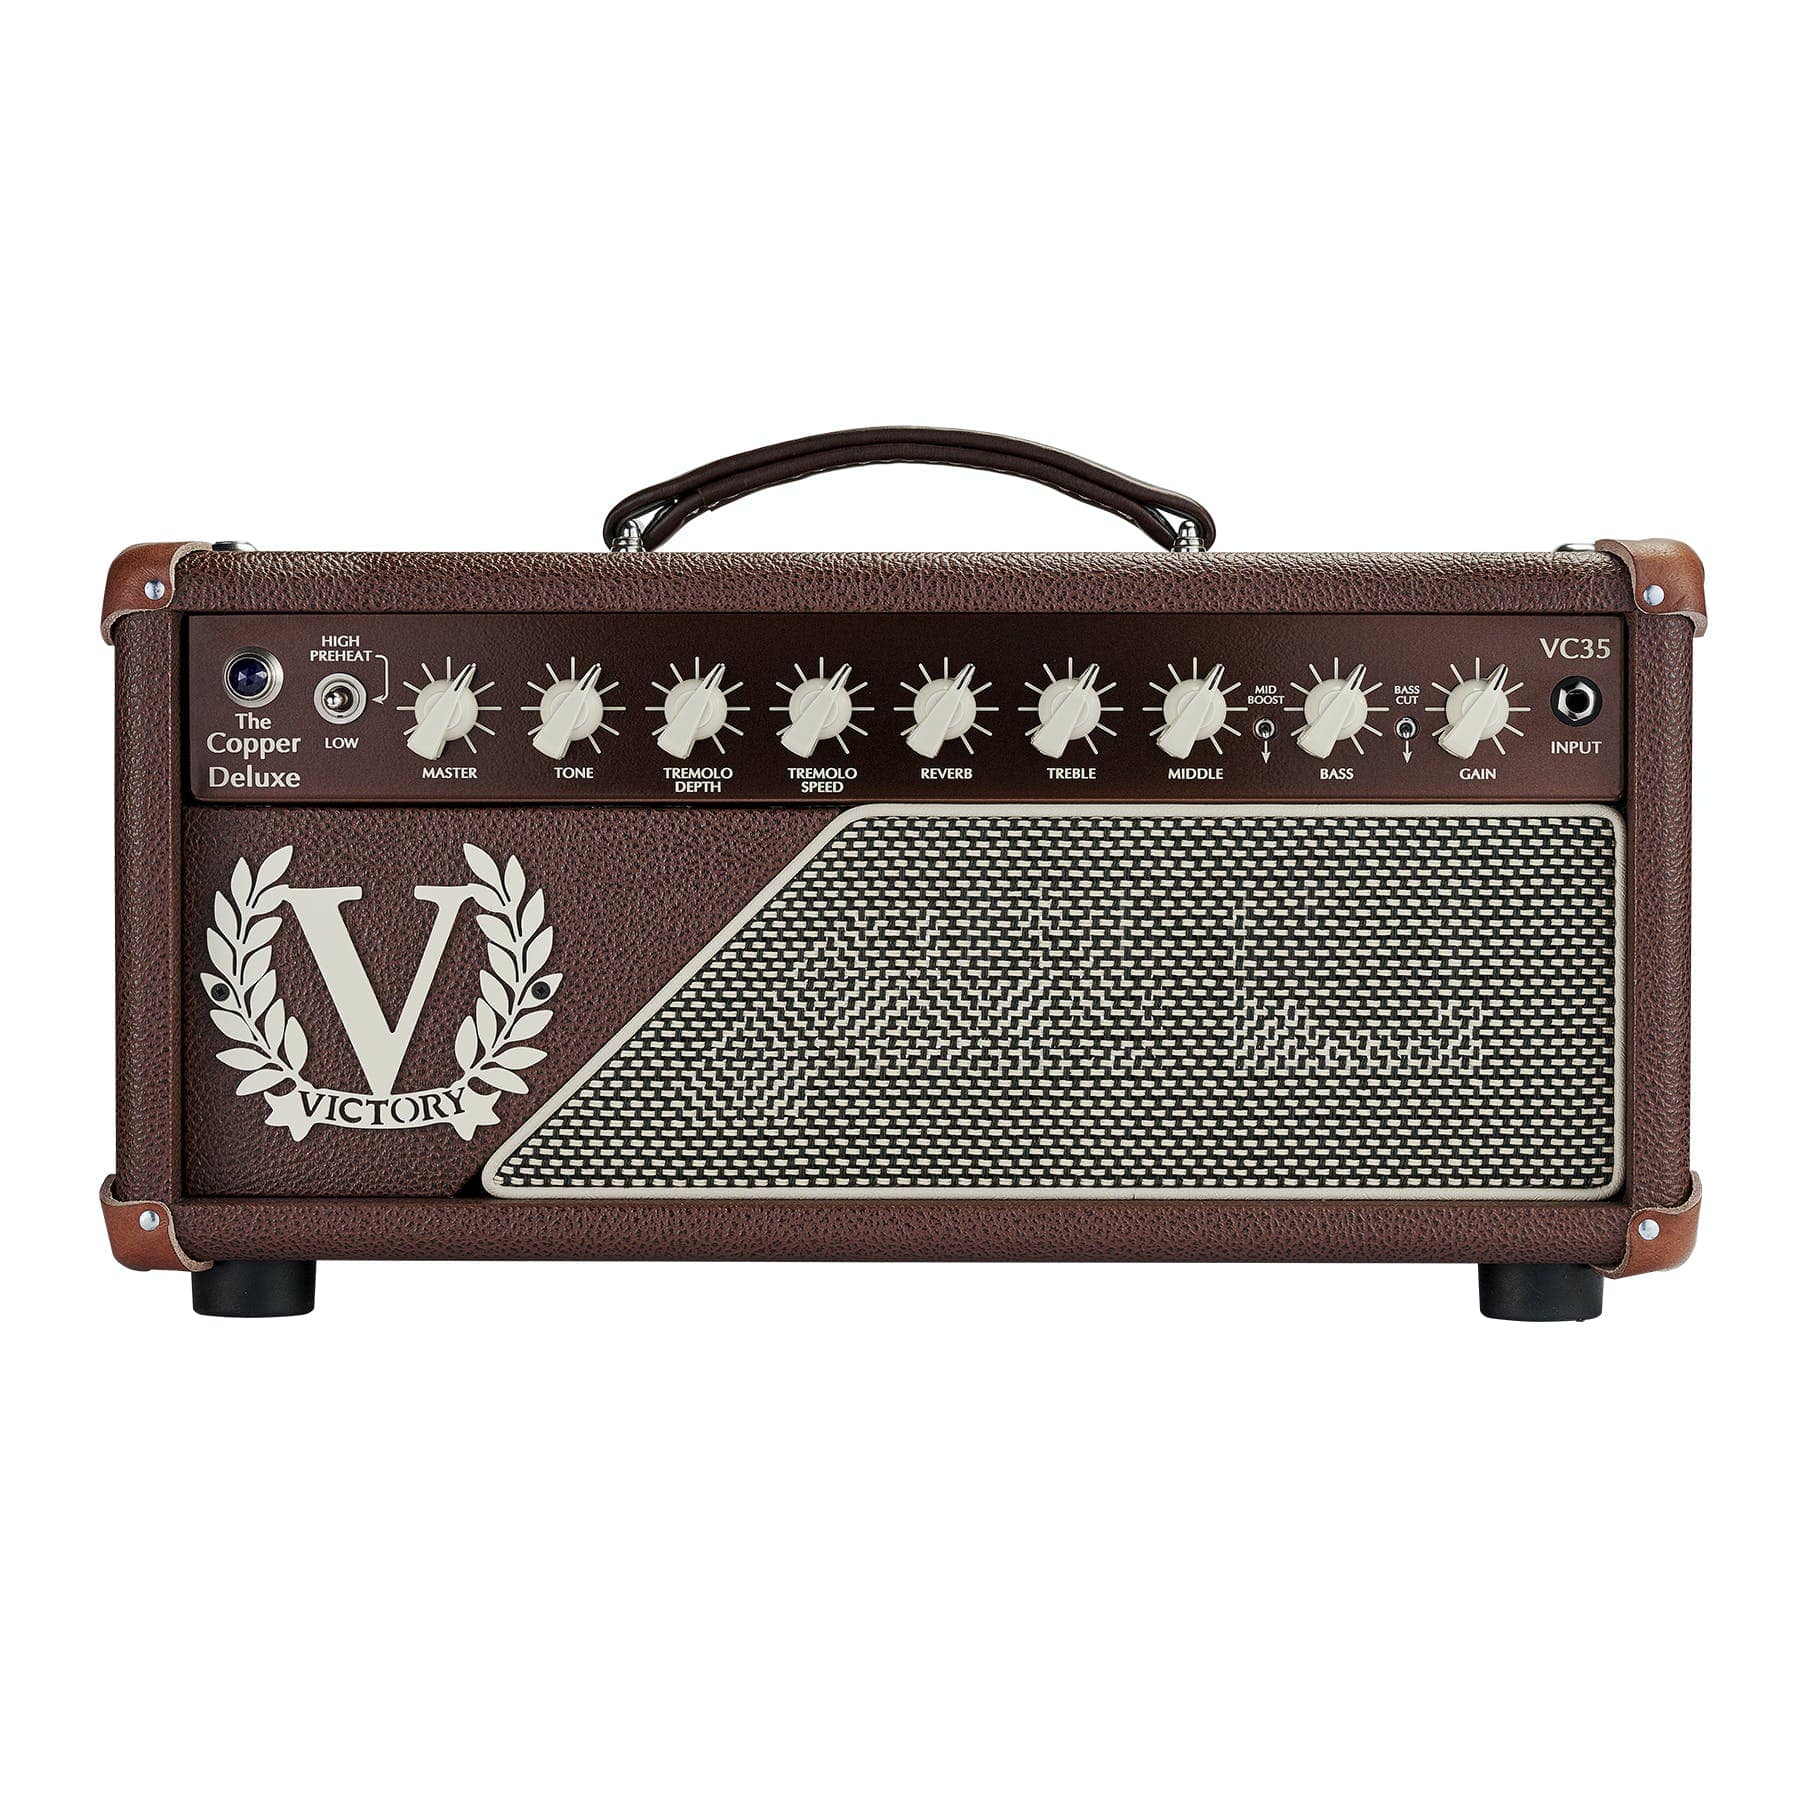 Victory Amplifier Victory VC35 'The Copper' Deluxe EL84 Valve Amp Head